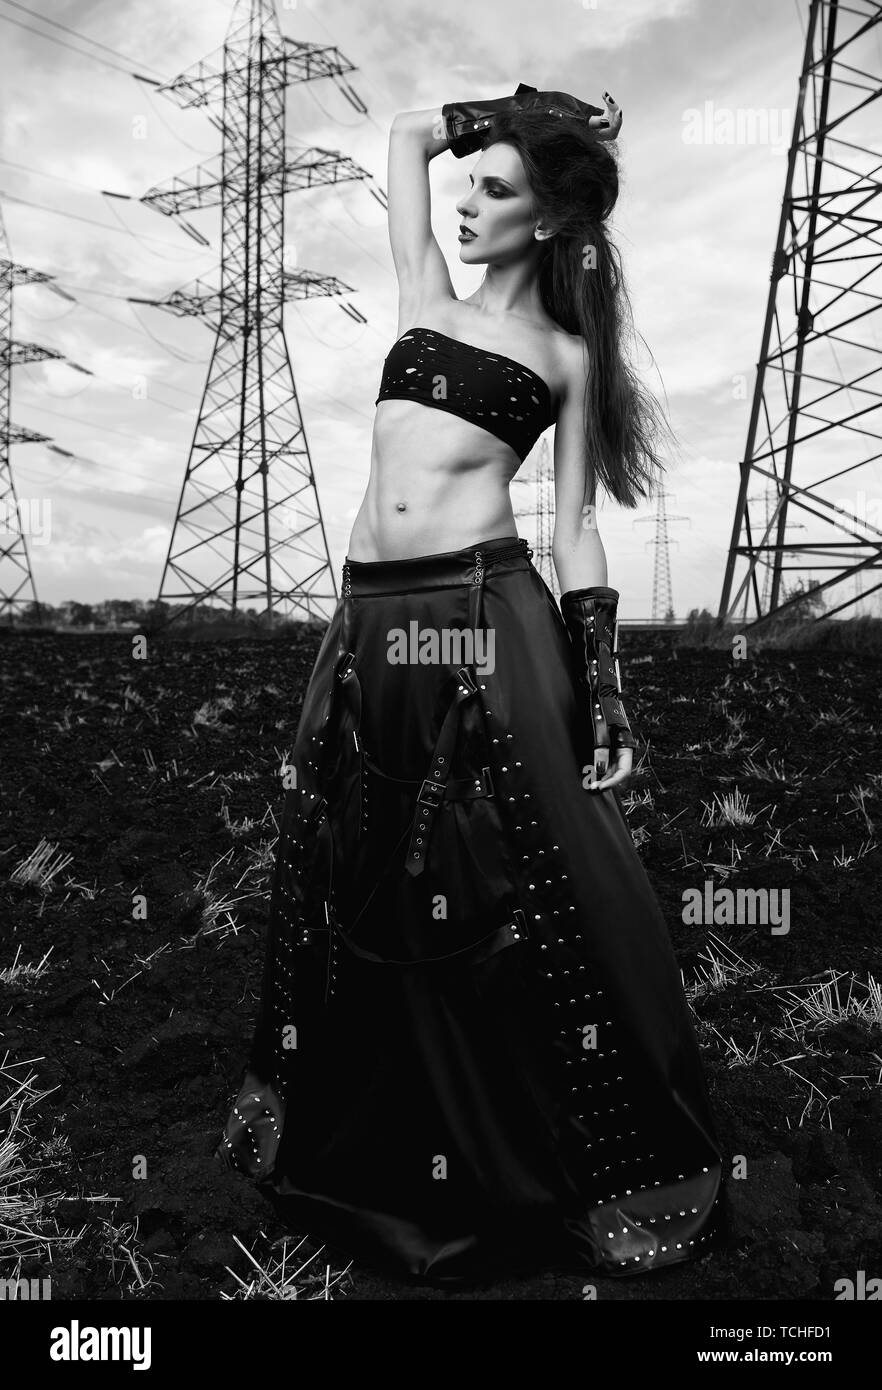 Informal fashion: the lovely slim young gothic girl dressed in black leather skirt and gloves. Outdoor portrait in field near power line towers. Black Stock Photo